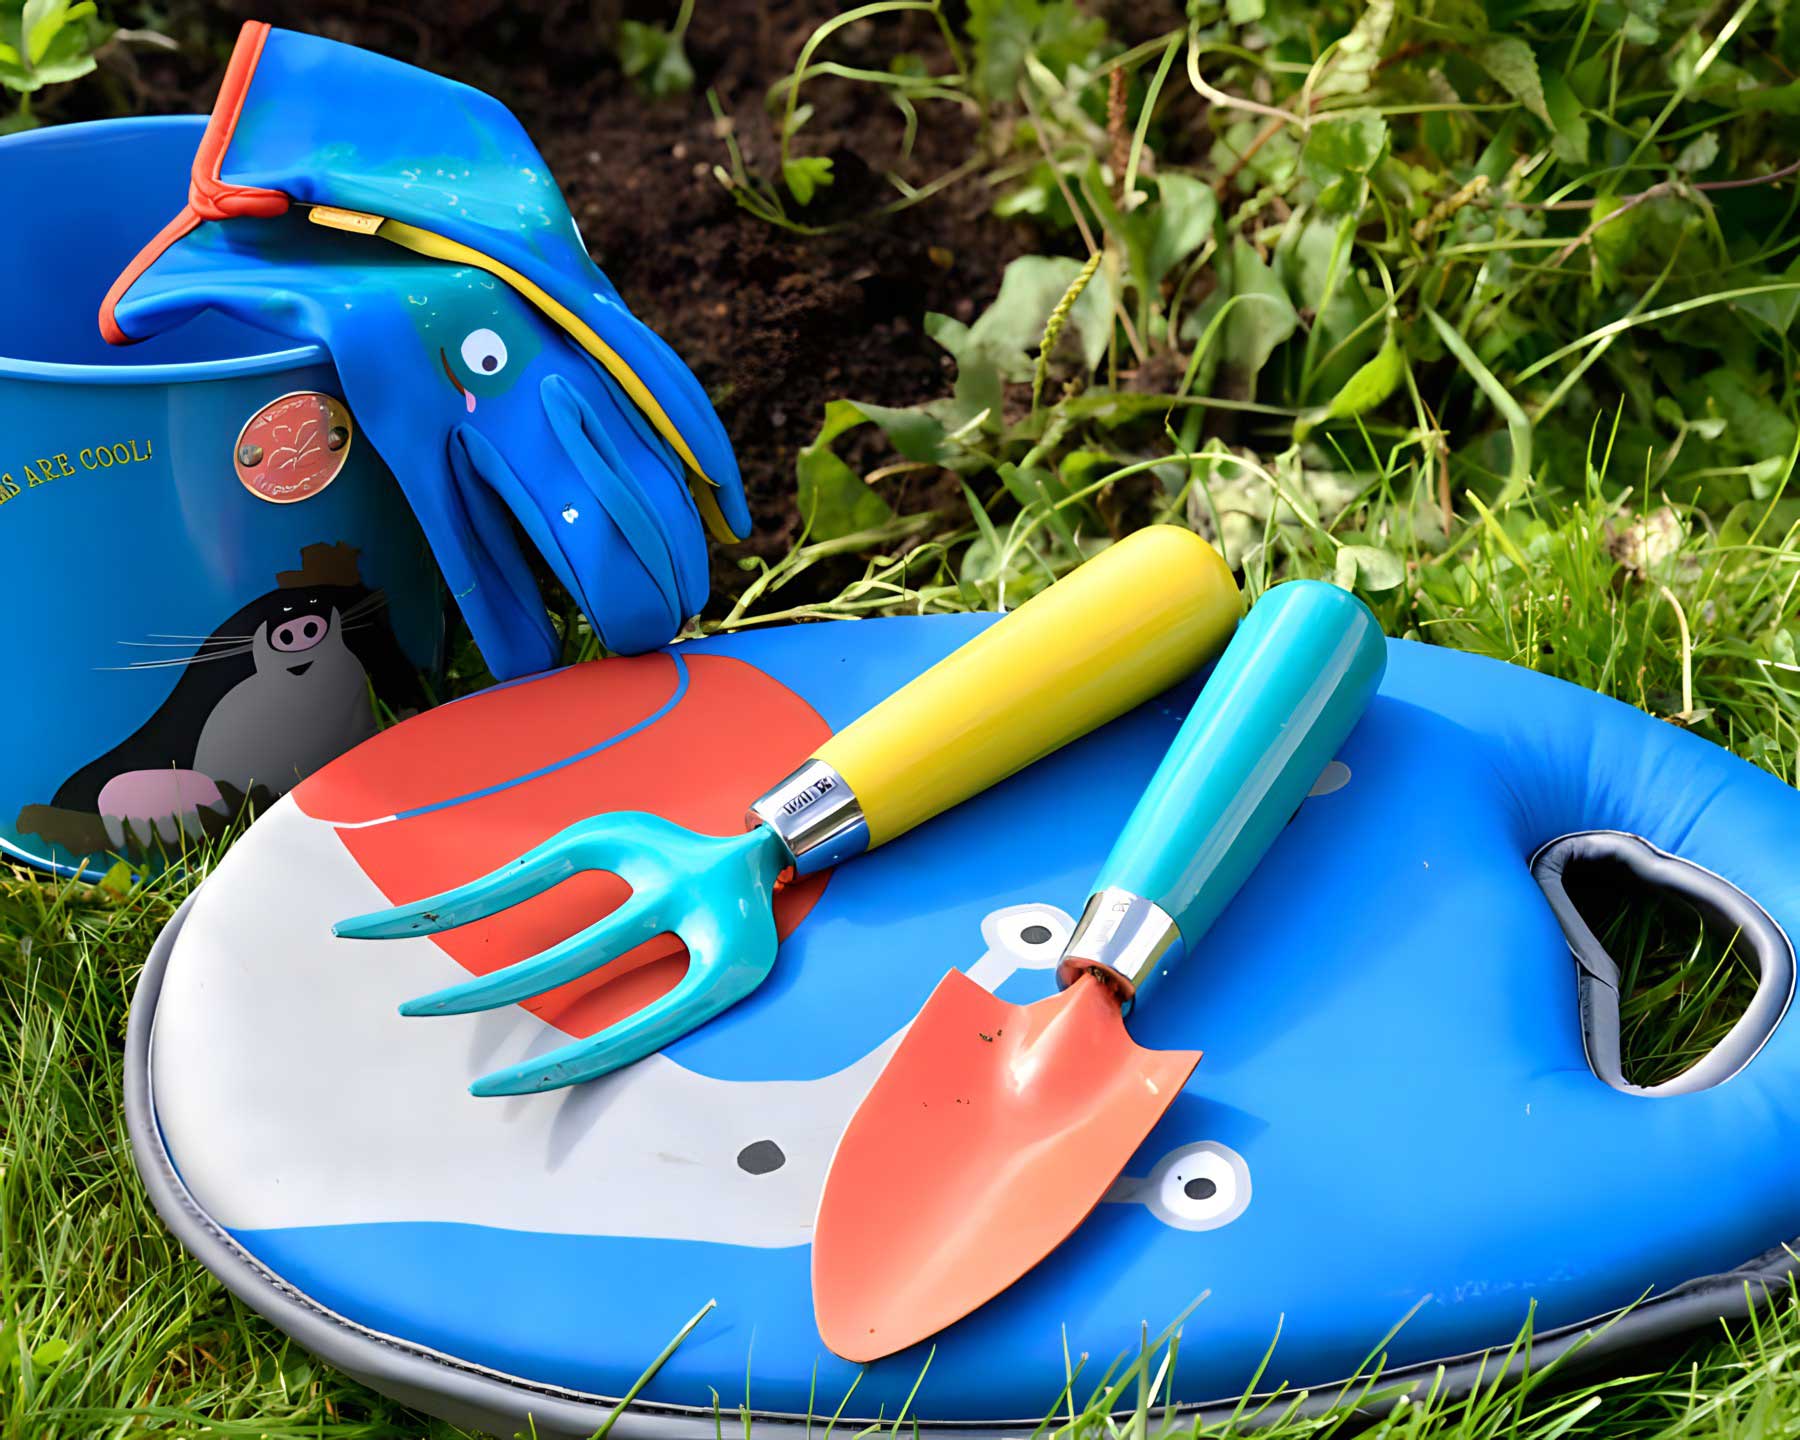 Childrens Trowel and Fork set - part of the 'Get me Gardening' range by the National Trust